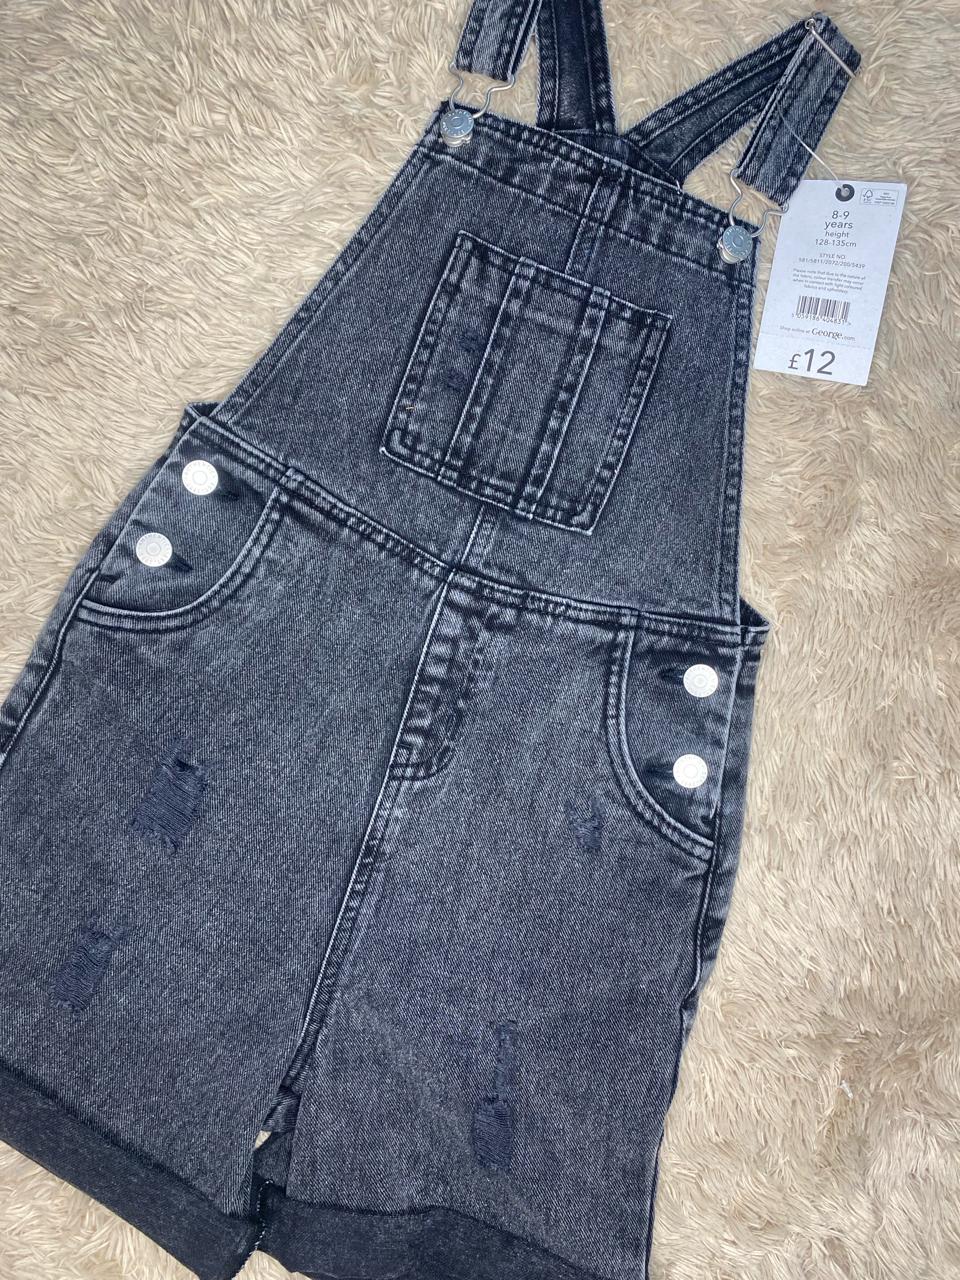 Jeans dungaree